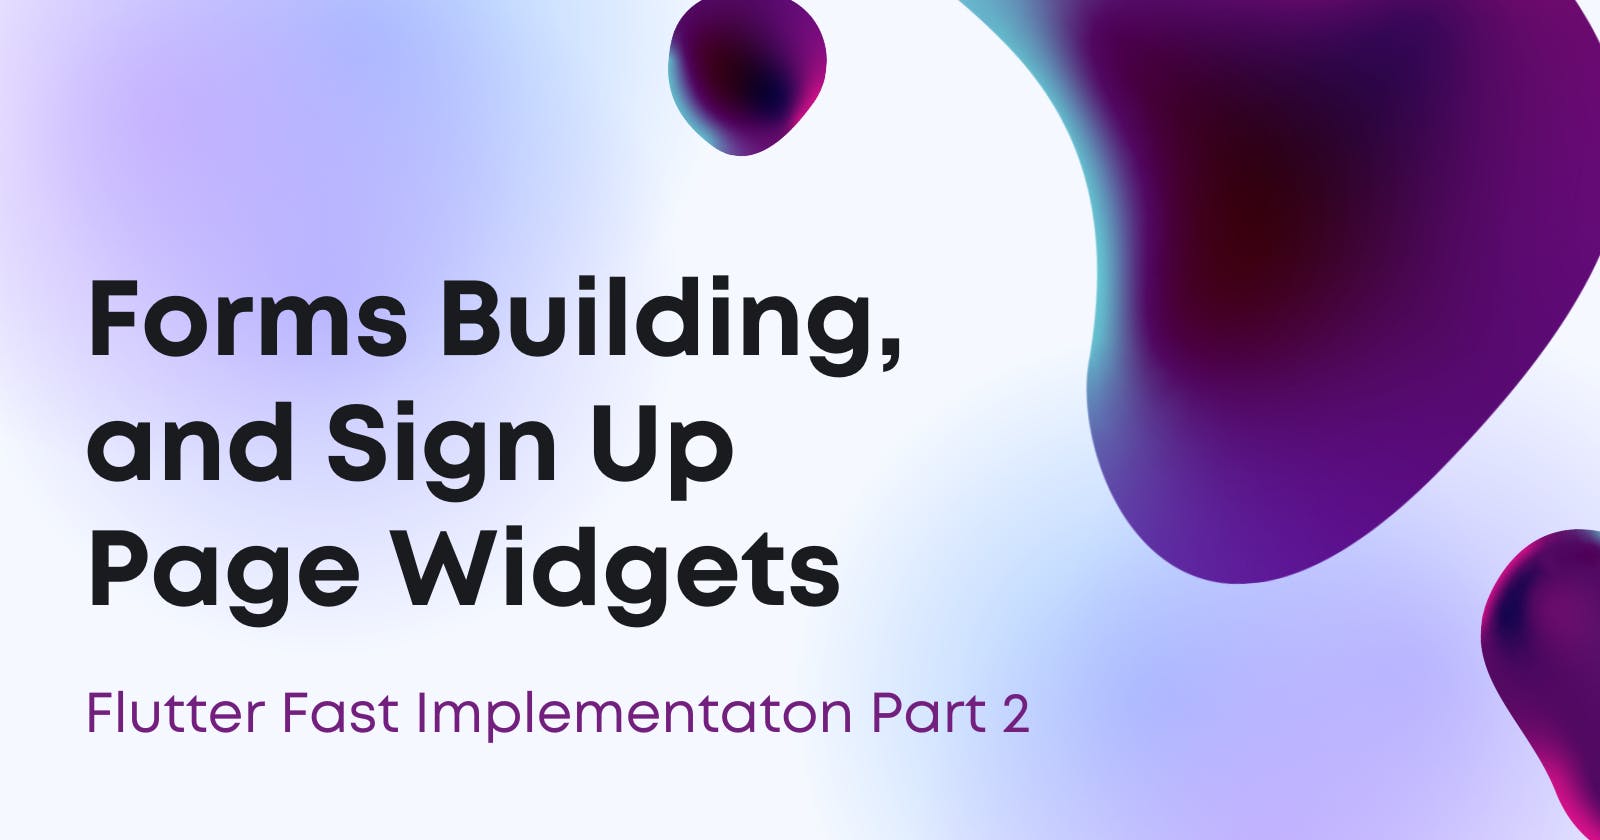 Flutter Fast Implementation: Forms Building,
and Sign Up Page Widgets